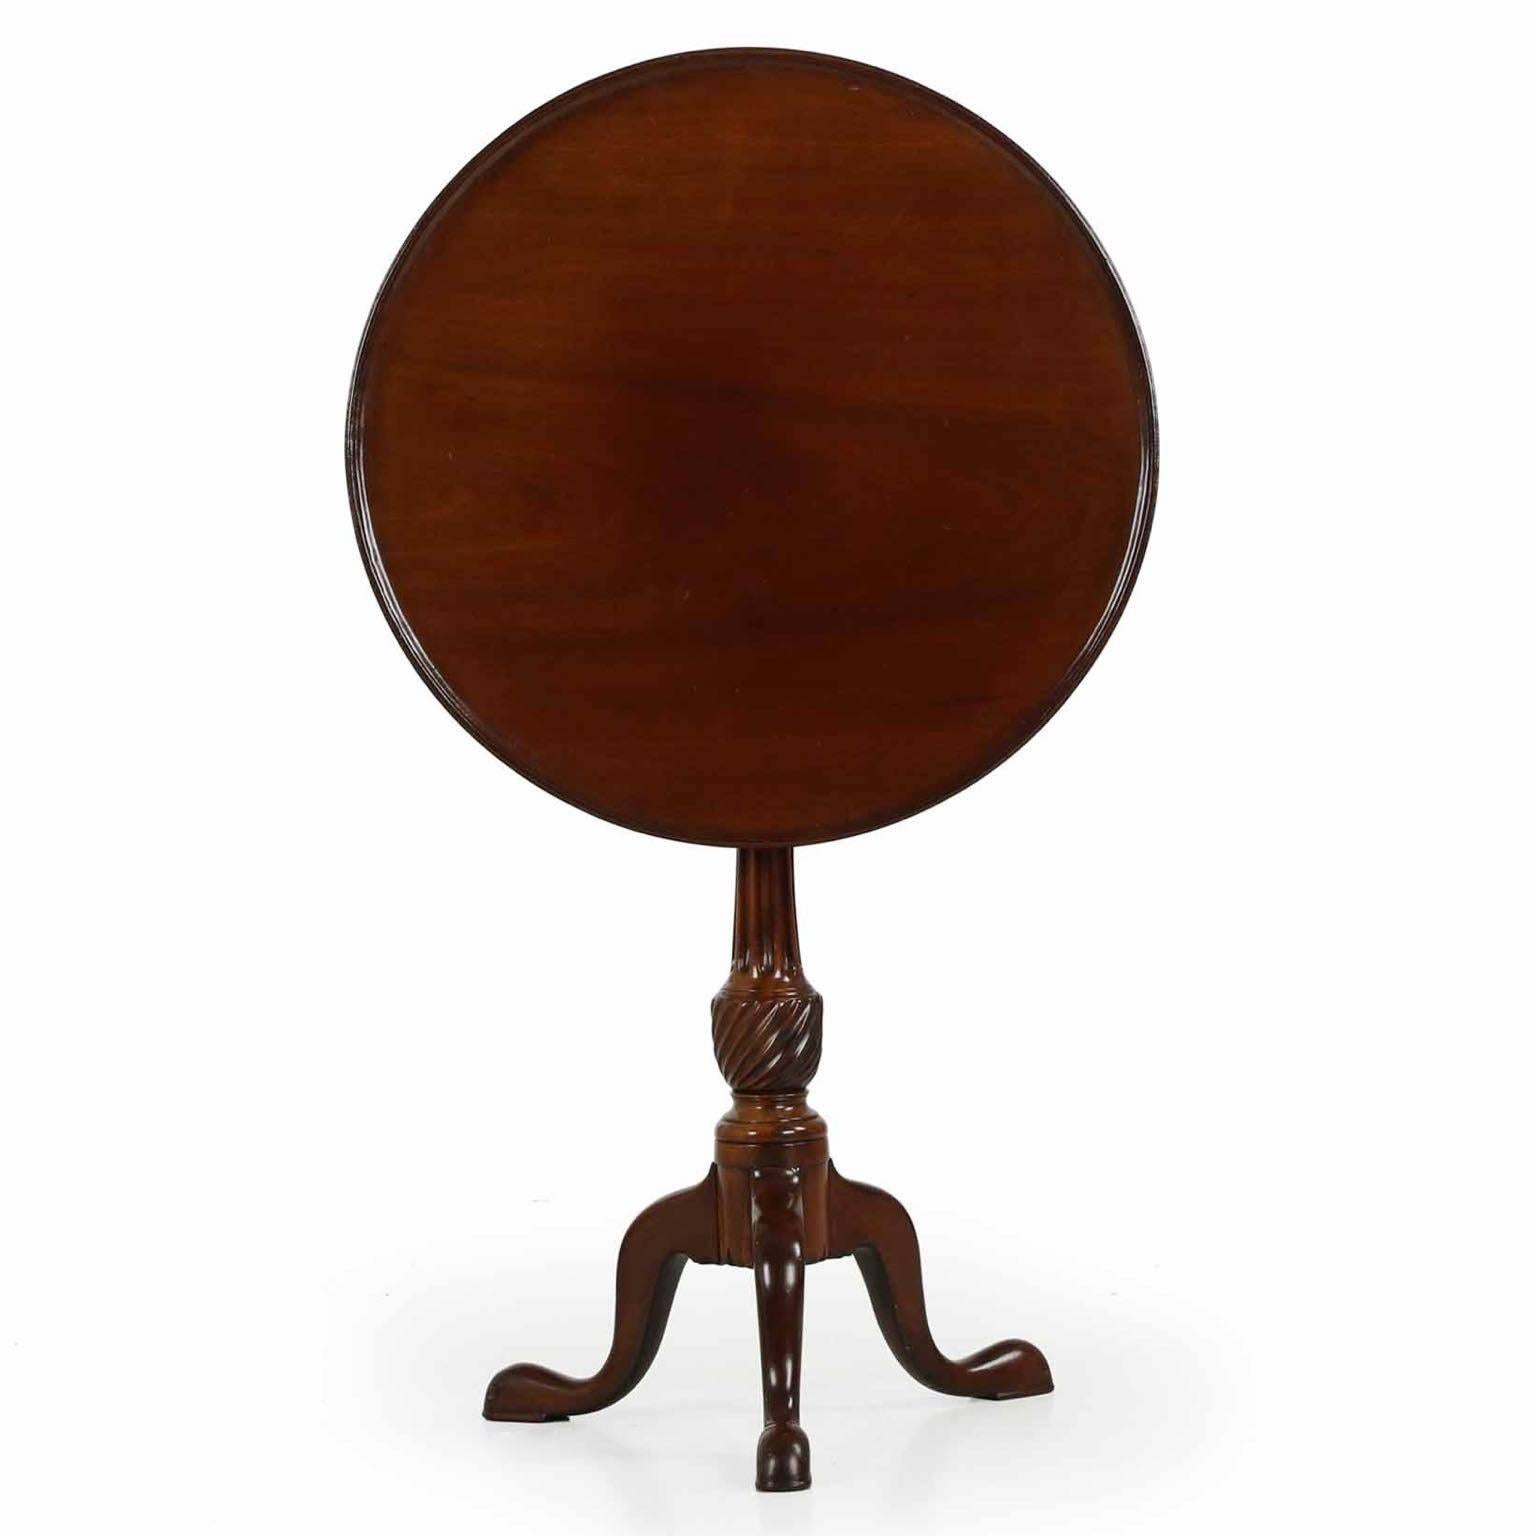 A most refined and perfectly balanced tripod leg tea table of the George III period, the craftsman for this piece chose the finest timbers for it’s execution. The circular top is carved out of one solid, thick slab of mahogany. It was turned on a